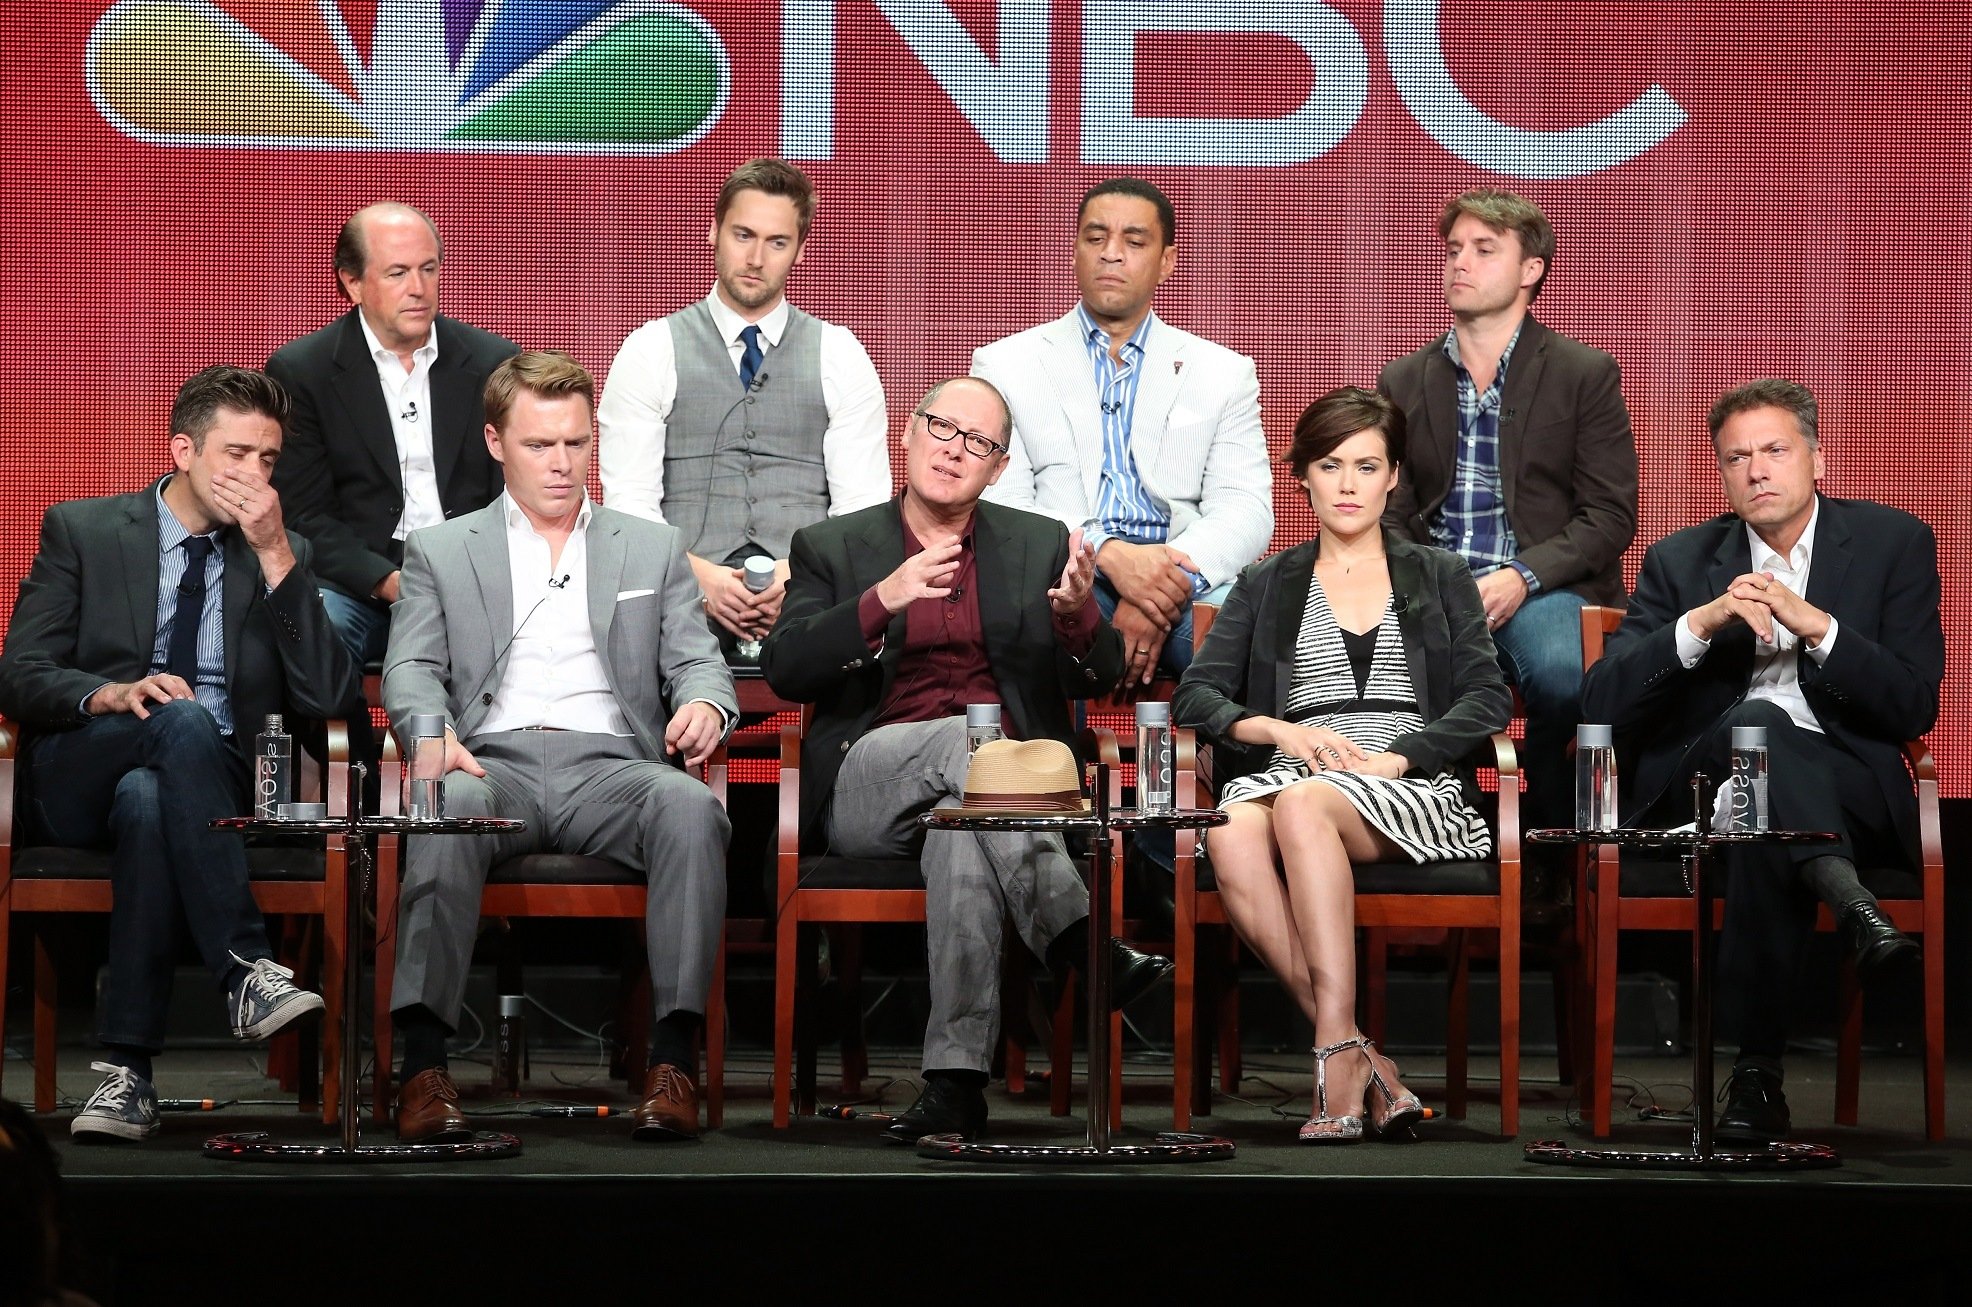 Megan Boone (front row, second from right) and the cast of NBC drama The Blacklist.